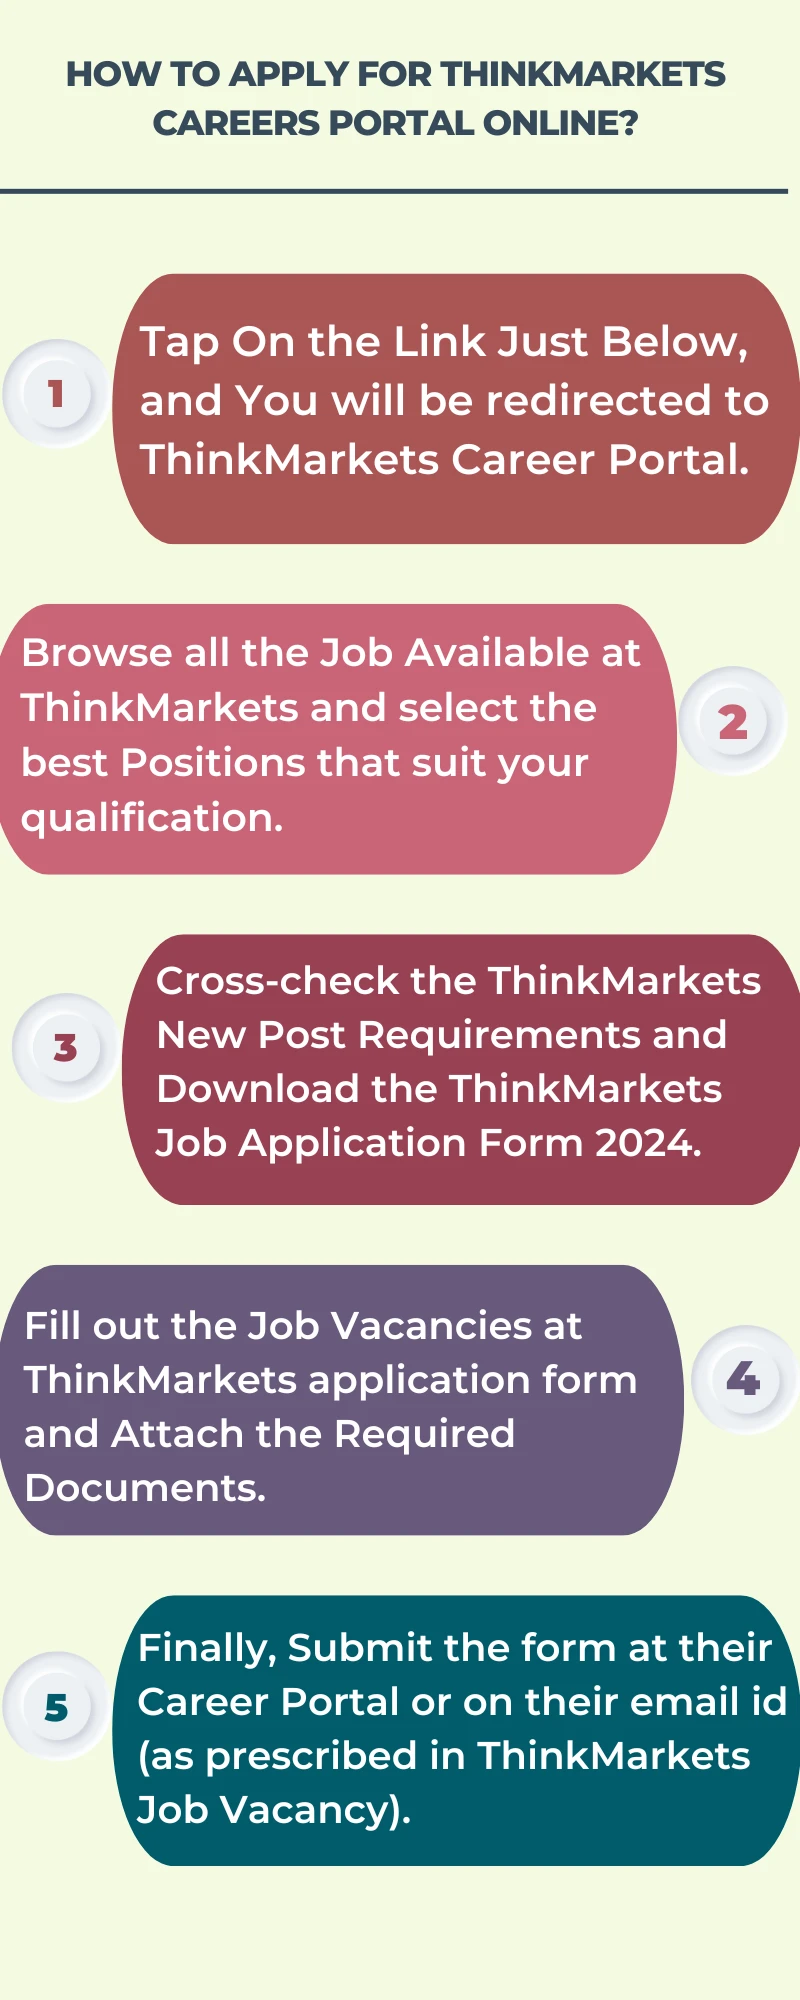 How To Apply for ThinkMarkets Careers Portal Online?